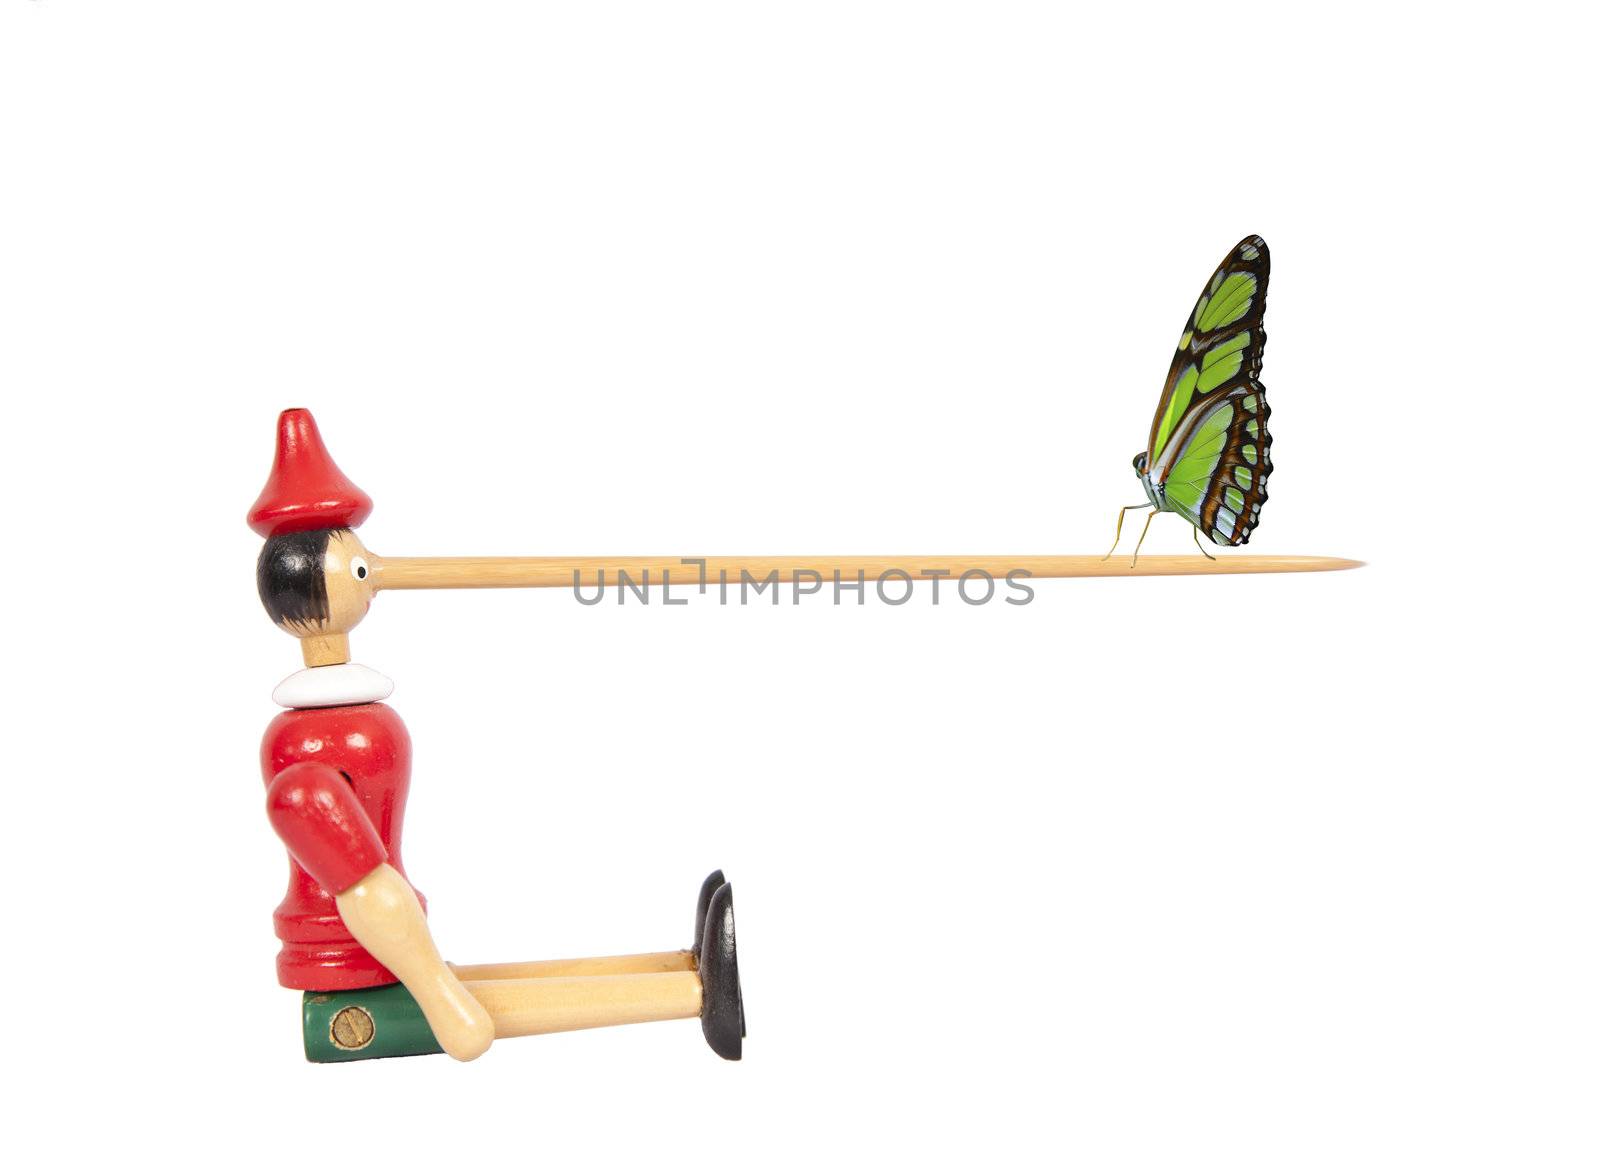 Wooden Pinocchio doll with long nose and butterfly